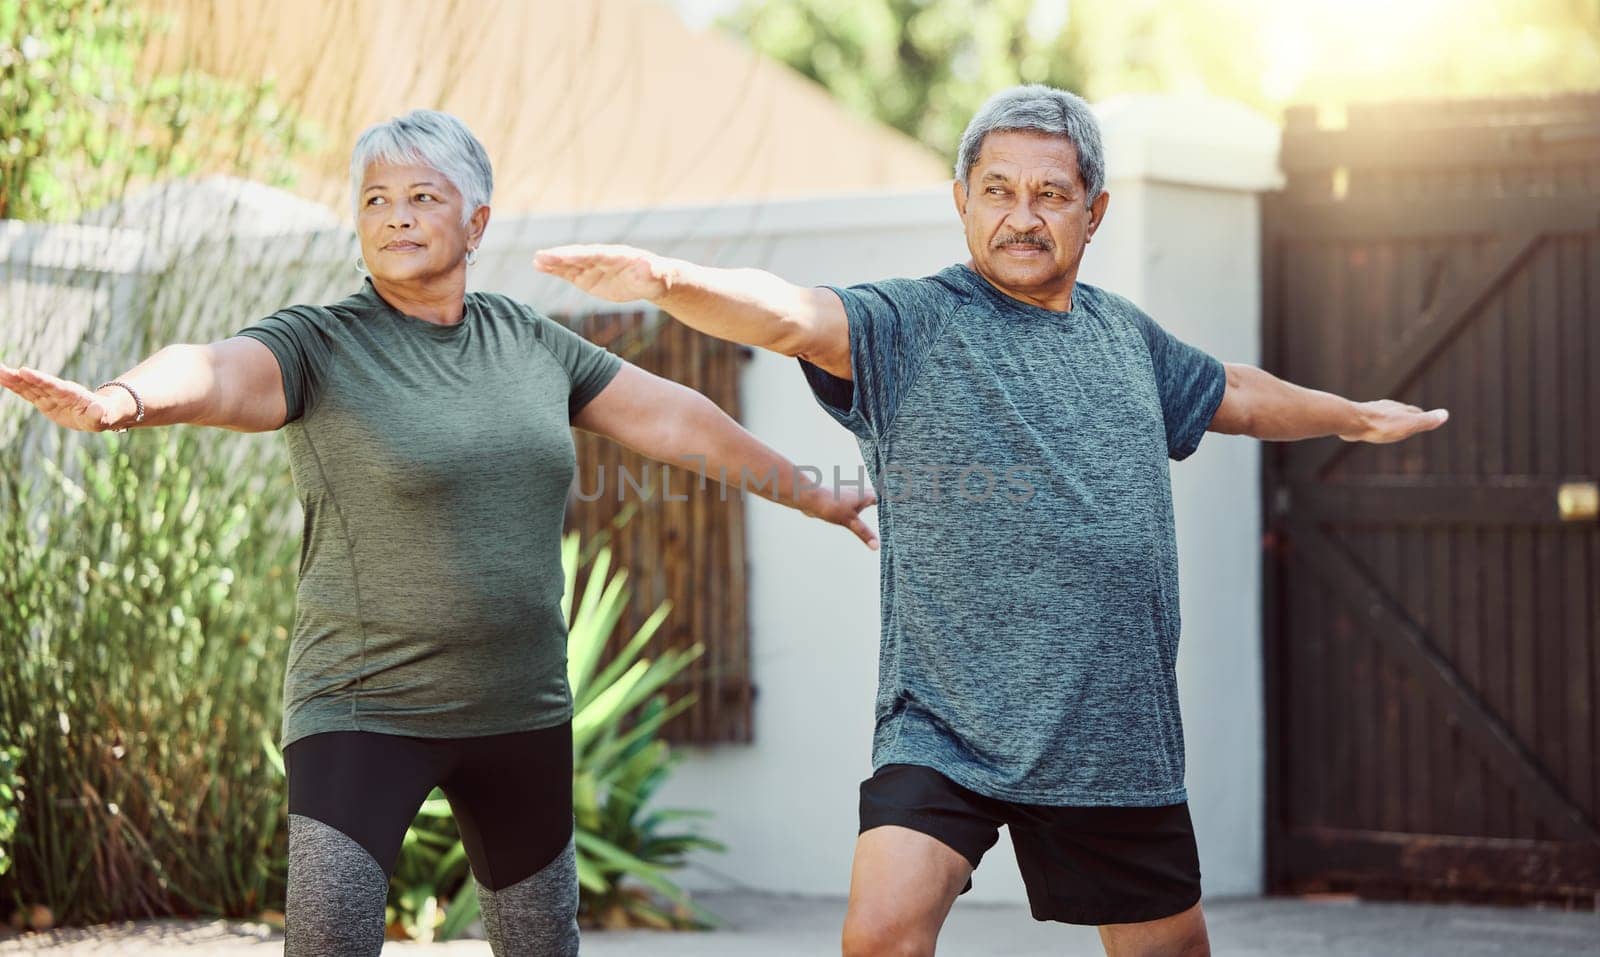 Exercise, yoga and health with a senior couple outdoor in their garden for a workout during retirement. Fitness, pilates and lifestyle with a mature man and woman training together in their backyard.